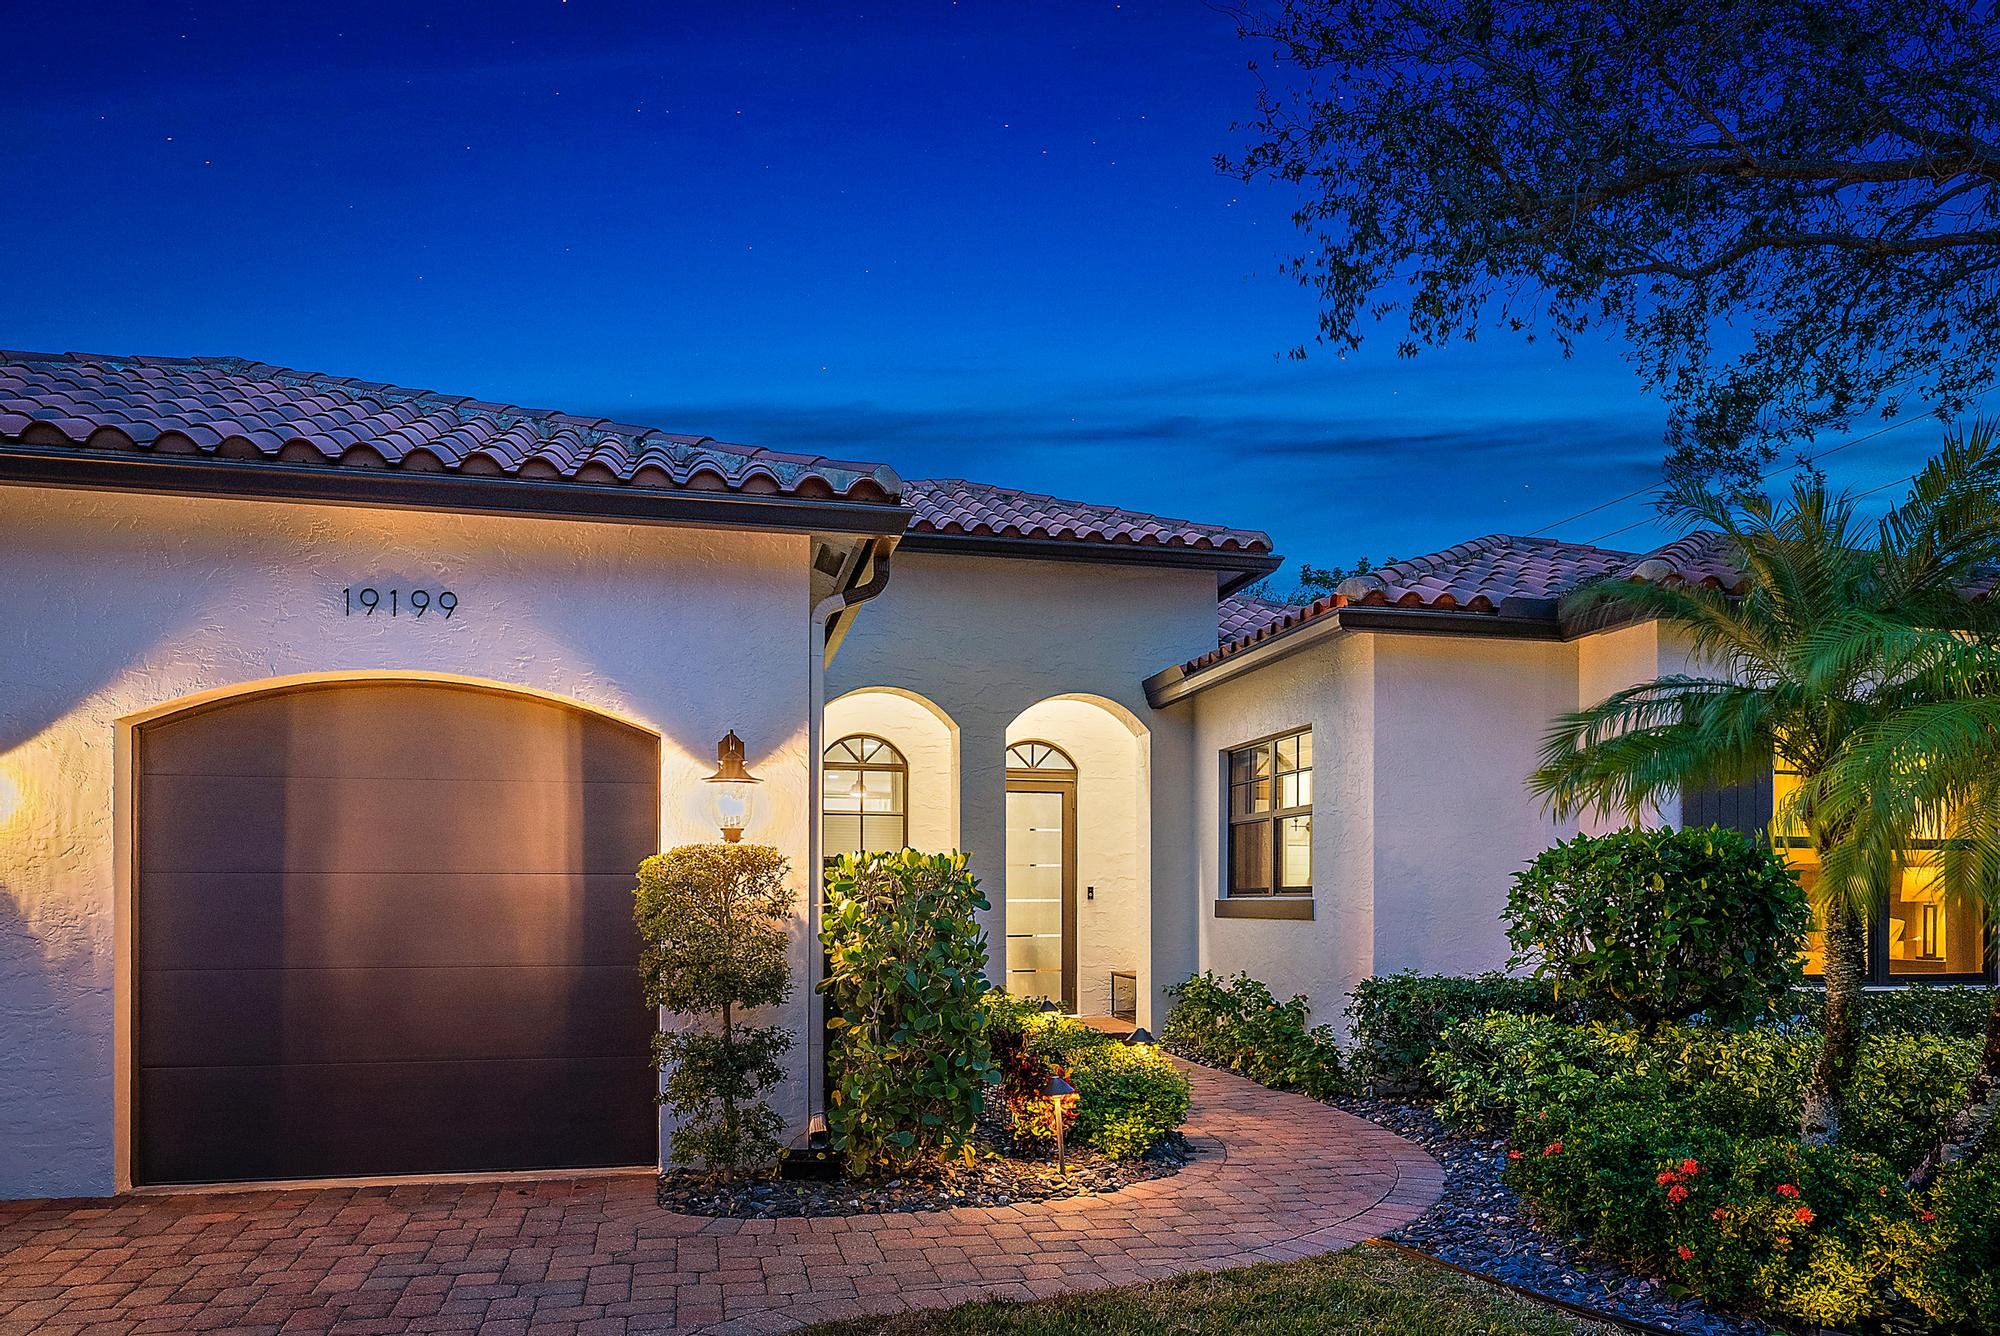 Home for Sale in the heart of Tequesta